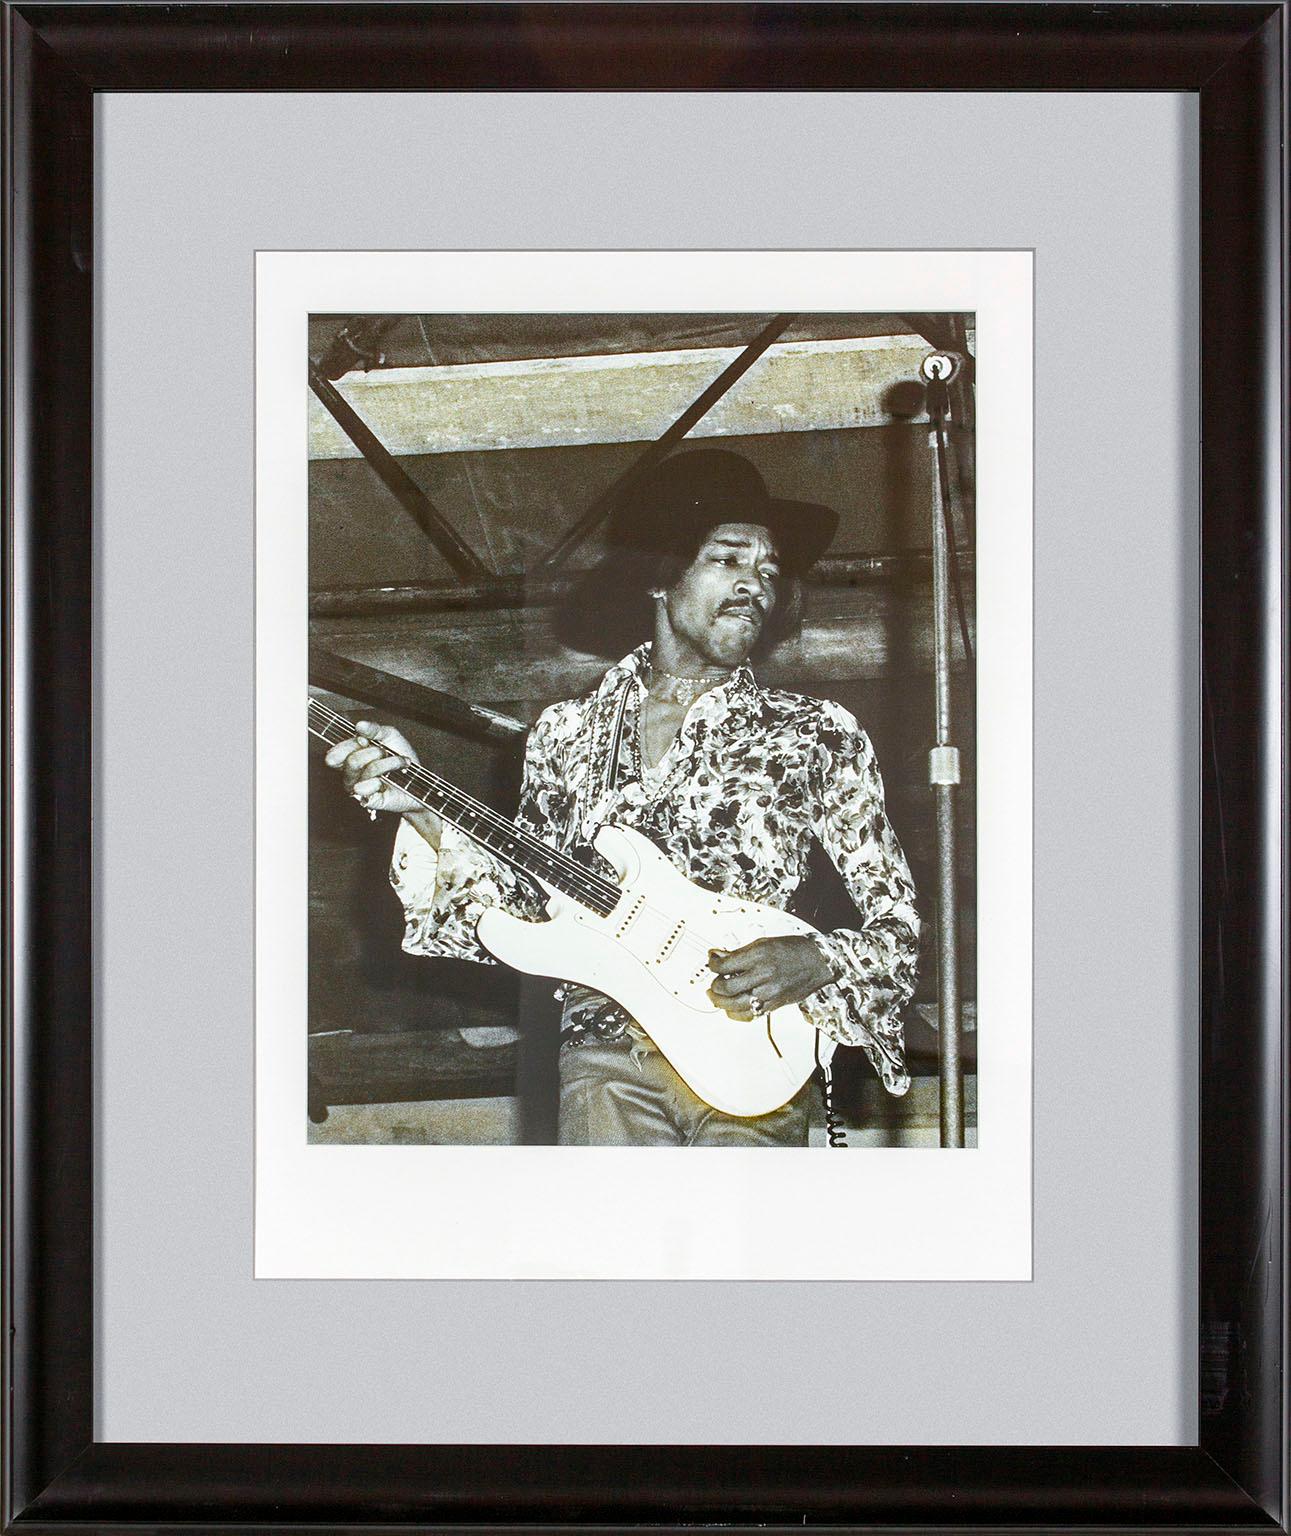 "Jimi Hendrix" framed black and white photograph by Michael Putland of Jimi Hendrix at the July 6, 1968, Woburn Music Festival in England.  Image size: 19 1/2 x 15 1/4 inches. This photo was previously displayed in a guest room of the original Hard